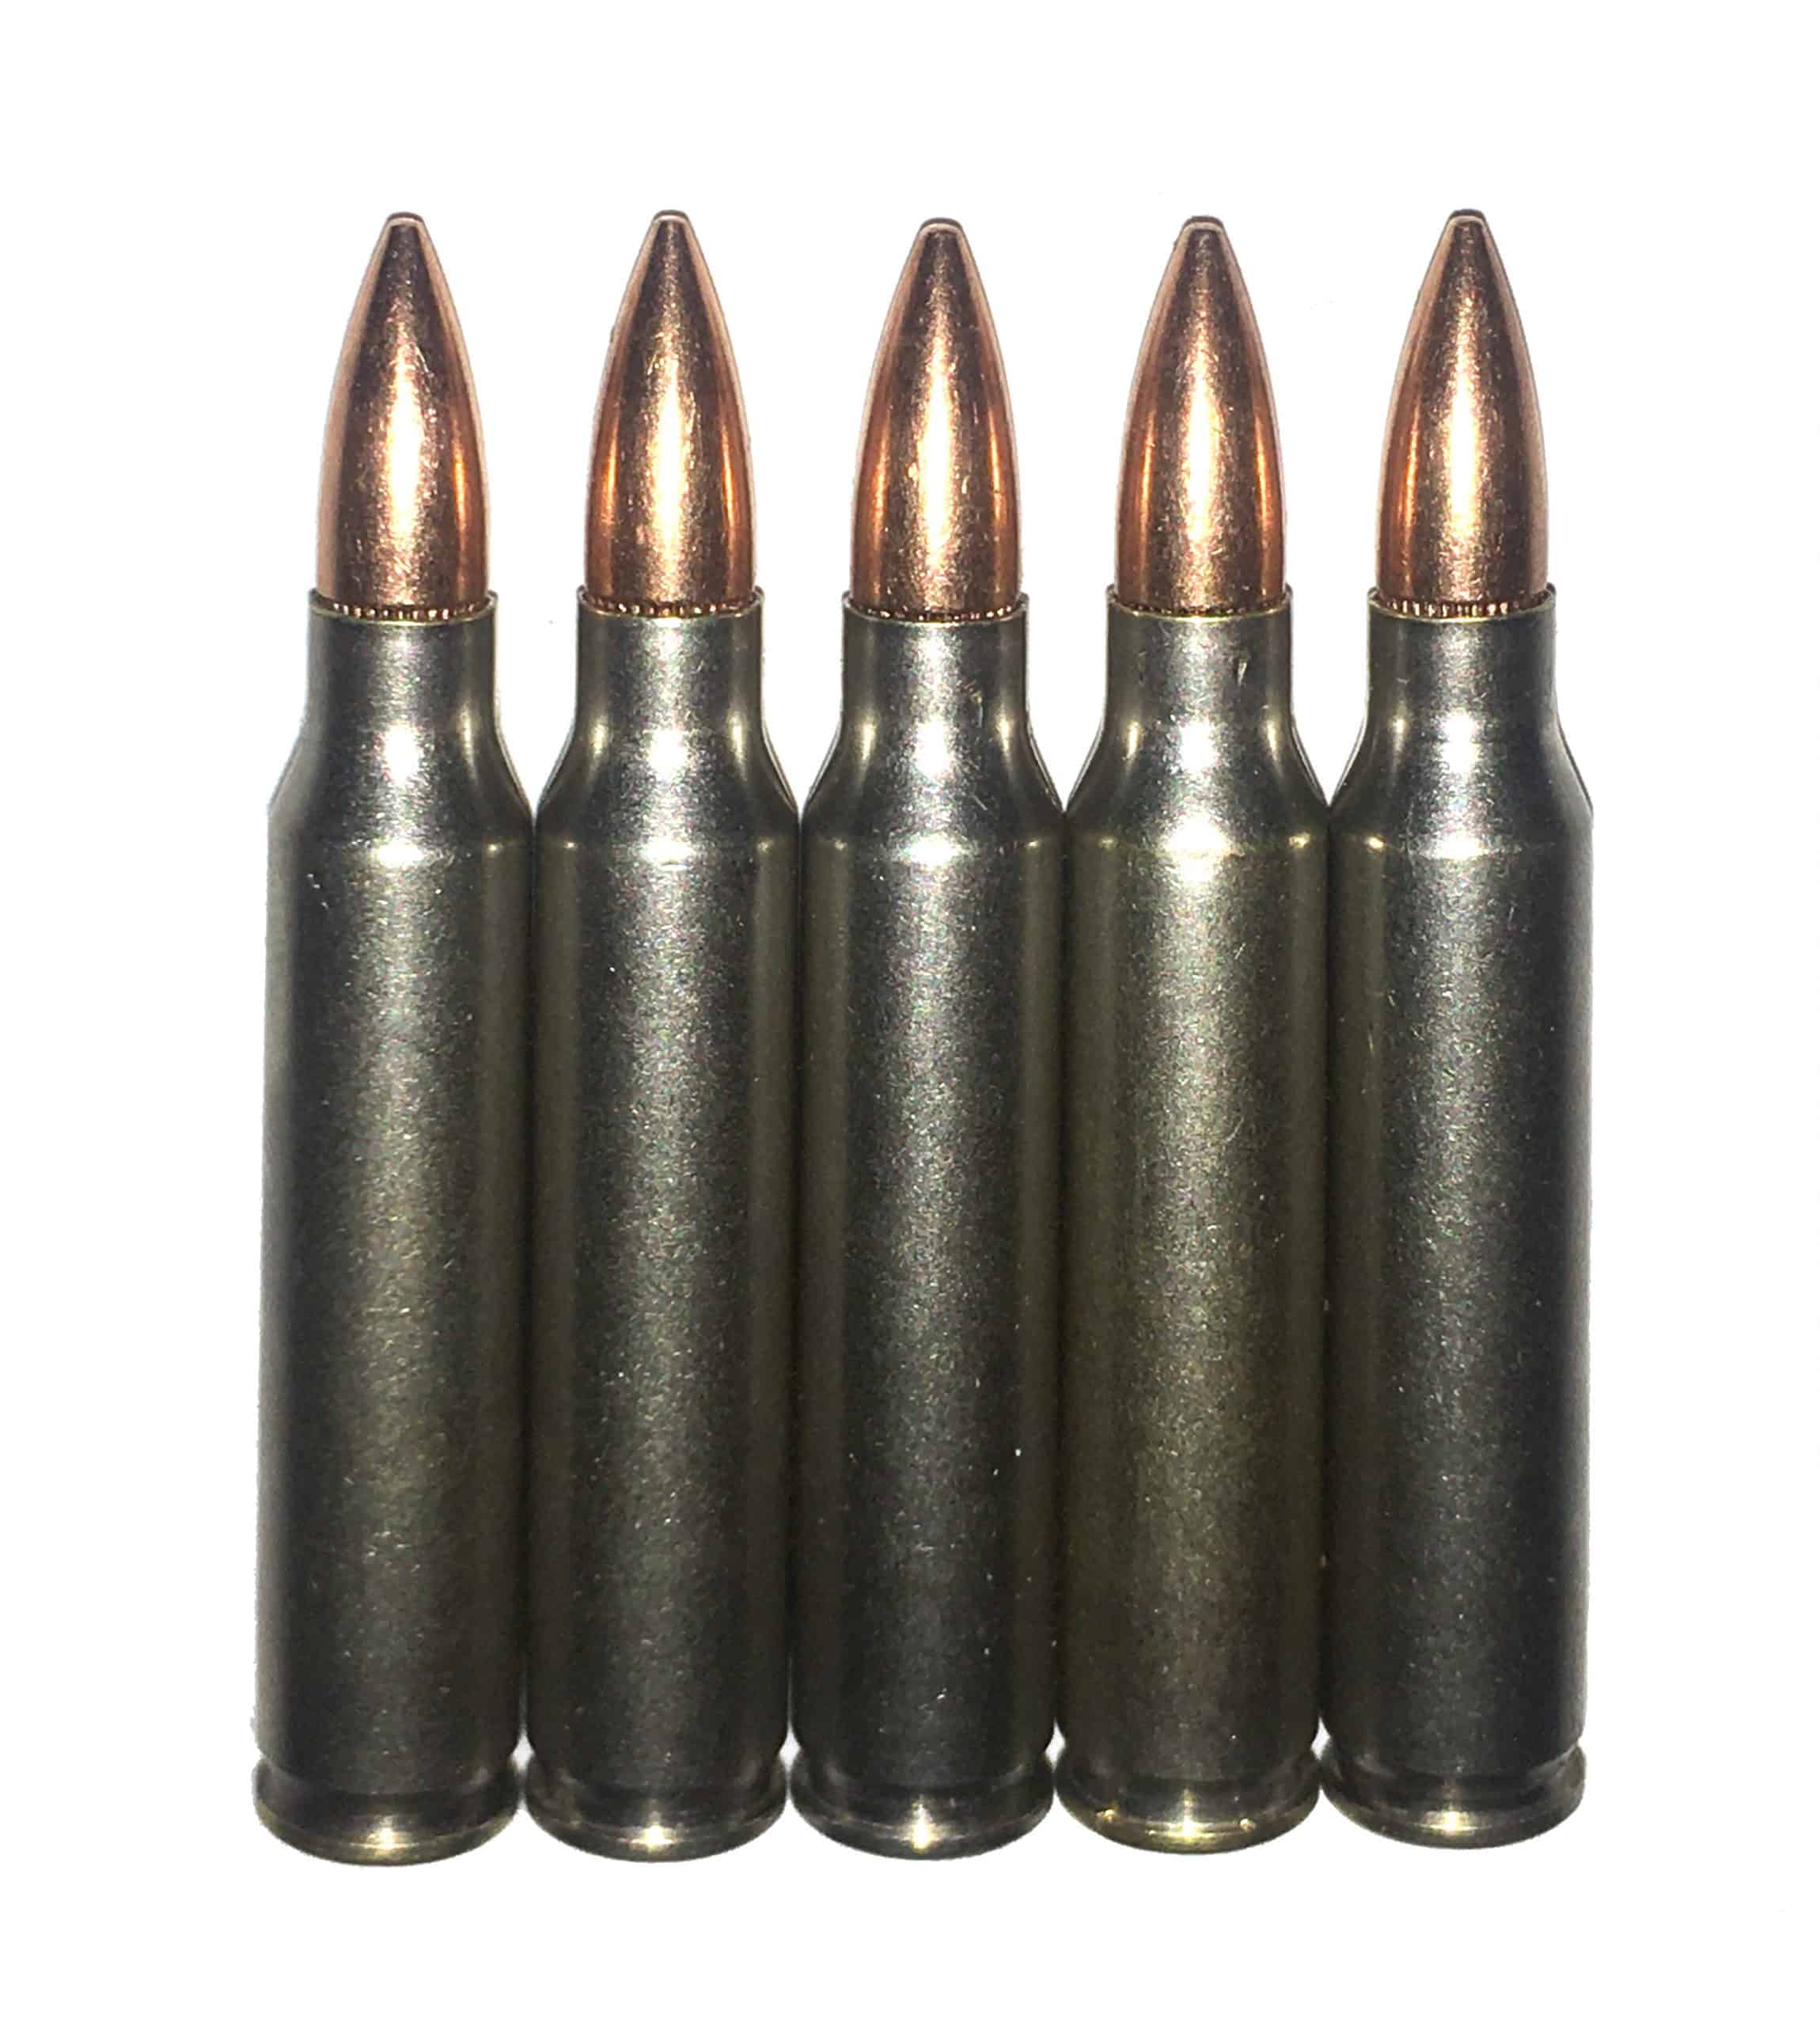 223 Remington Nickel - Snap Caps Dummy Rounds - Fake Bullets